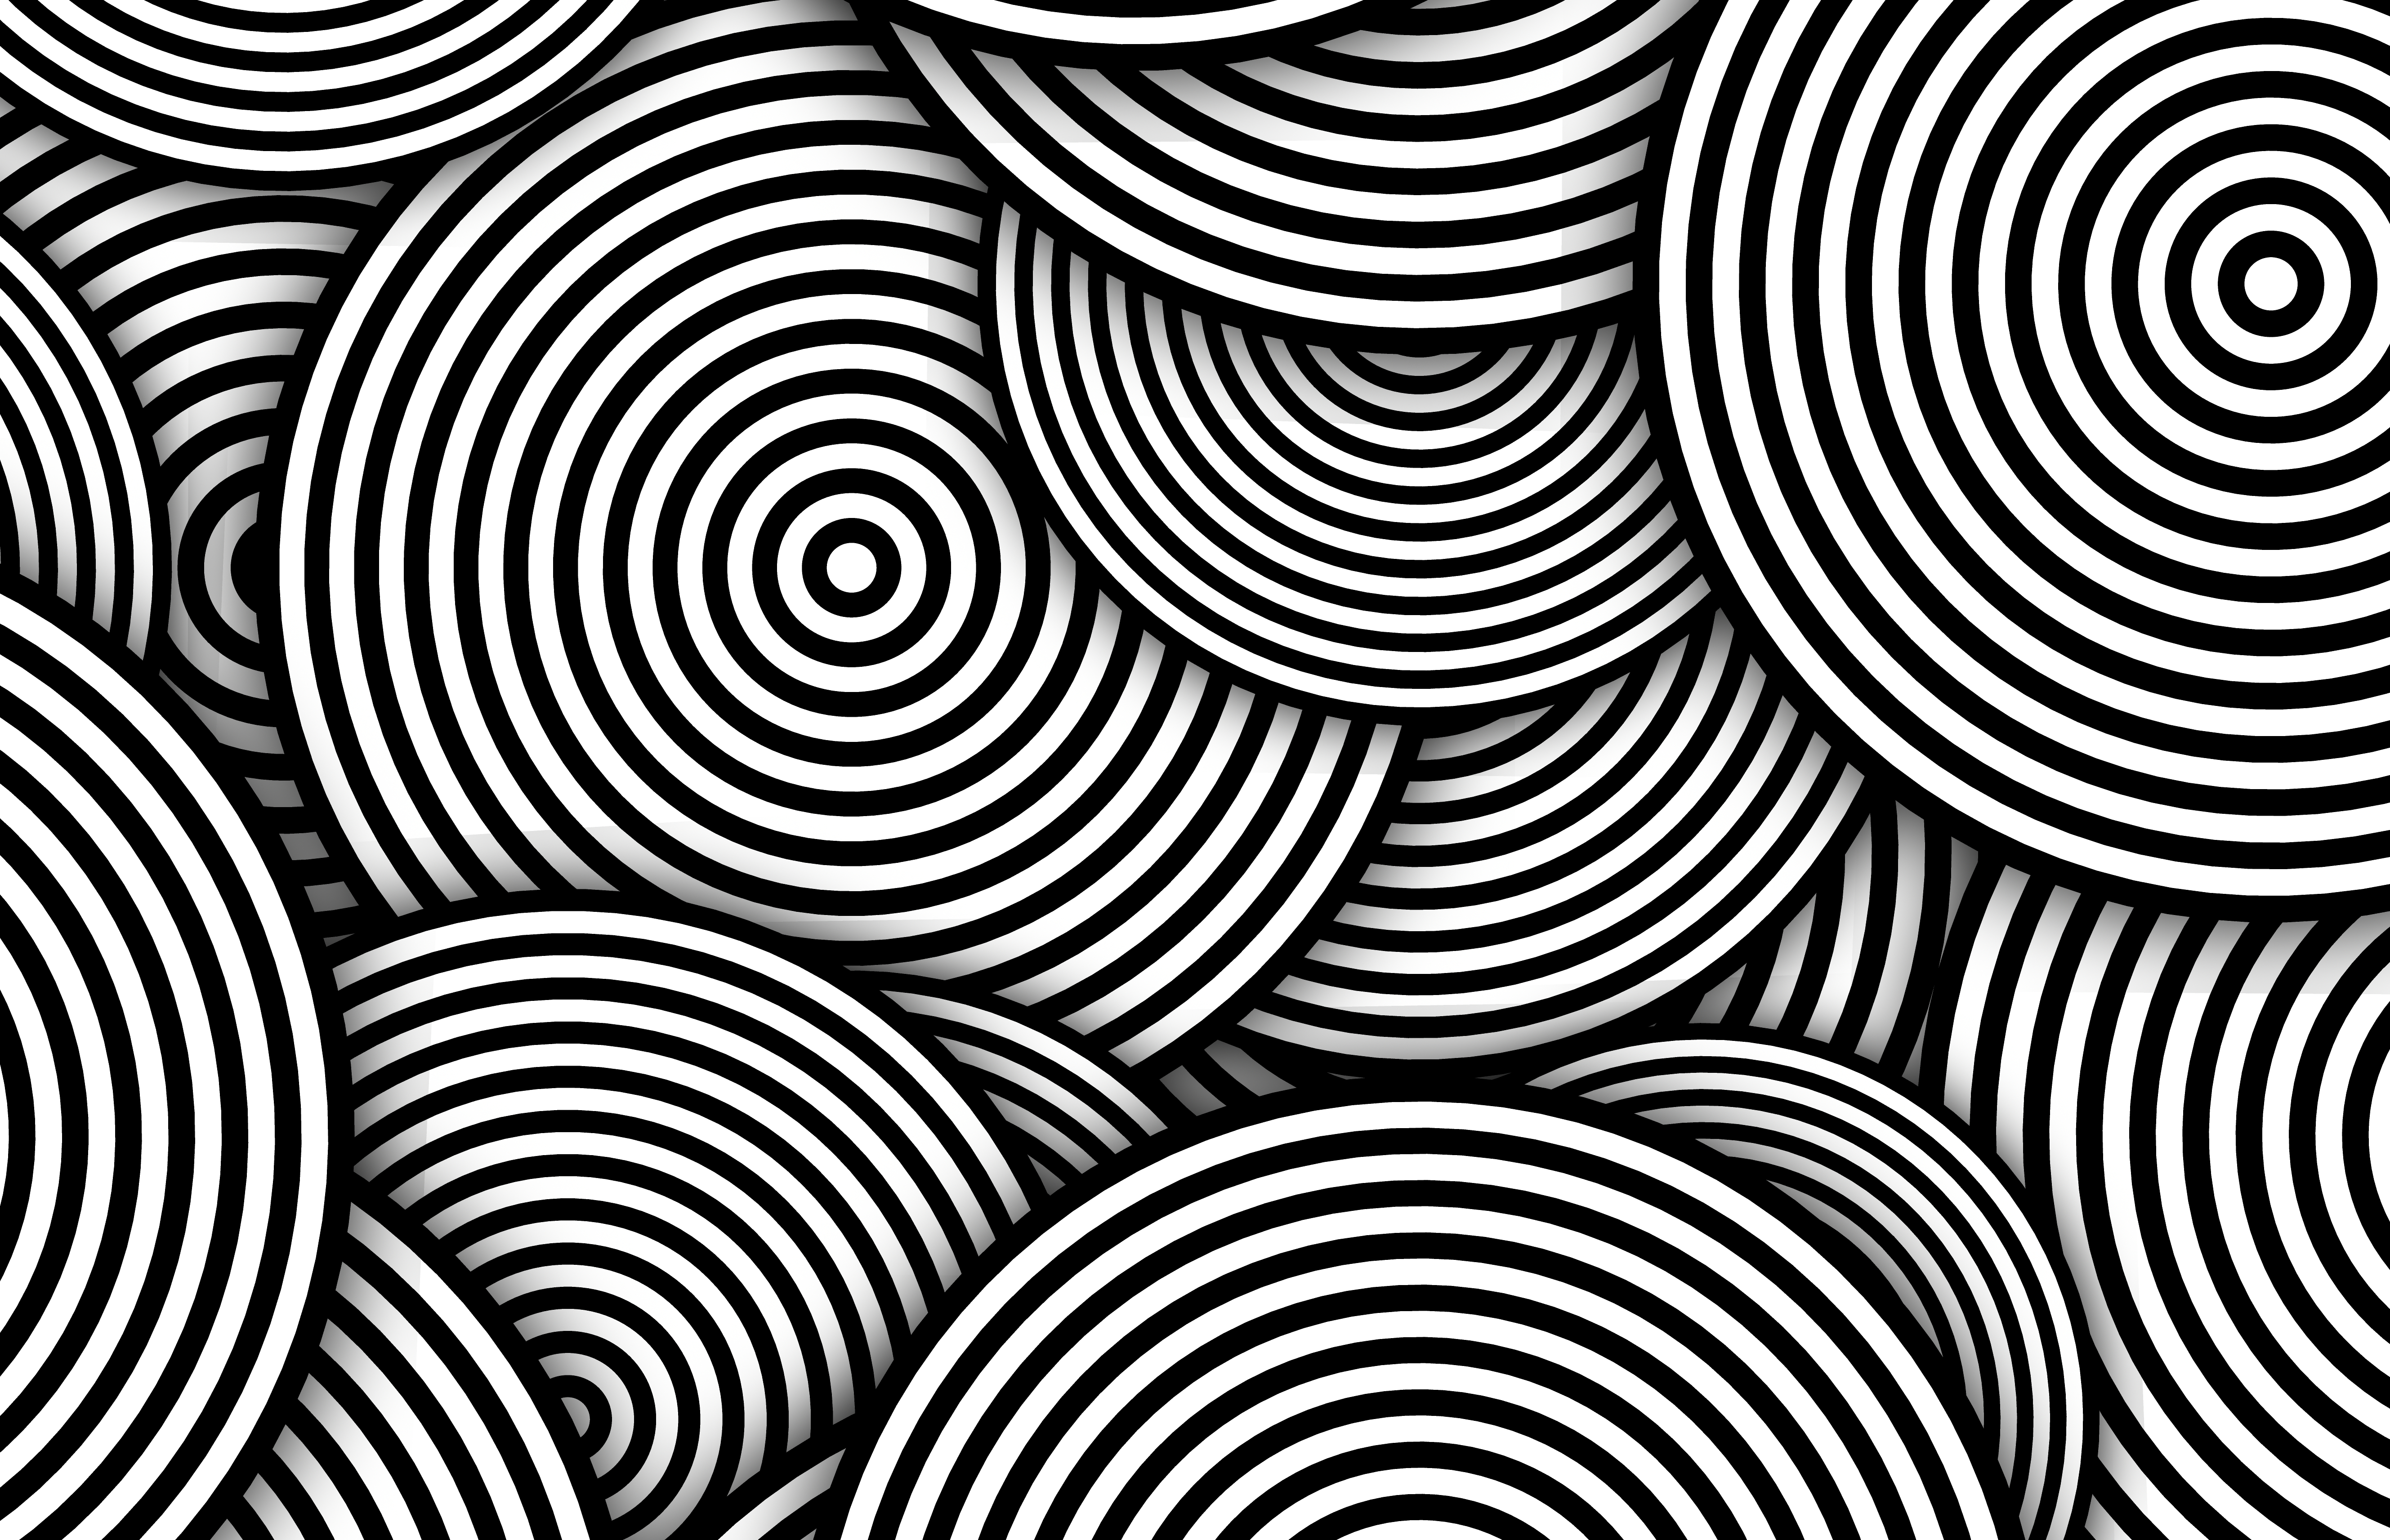 Monochrome Abstract Circle Line Art Lines Pattern 5315x3425